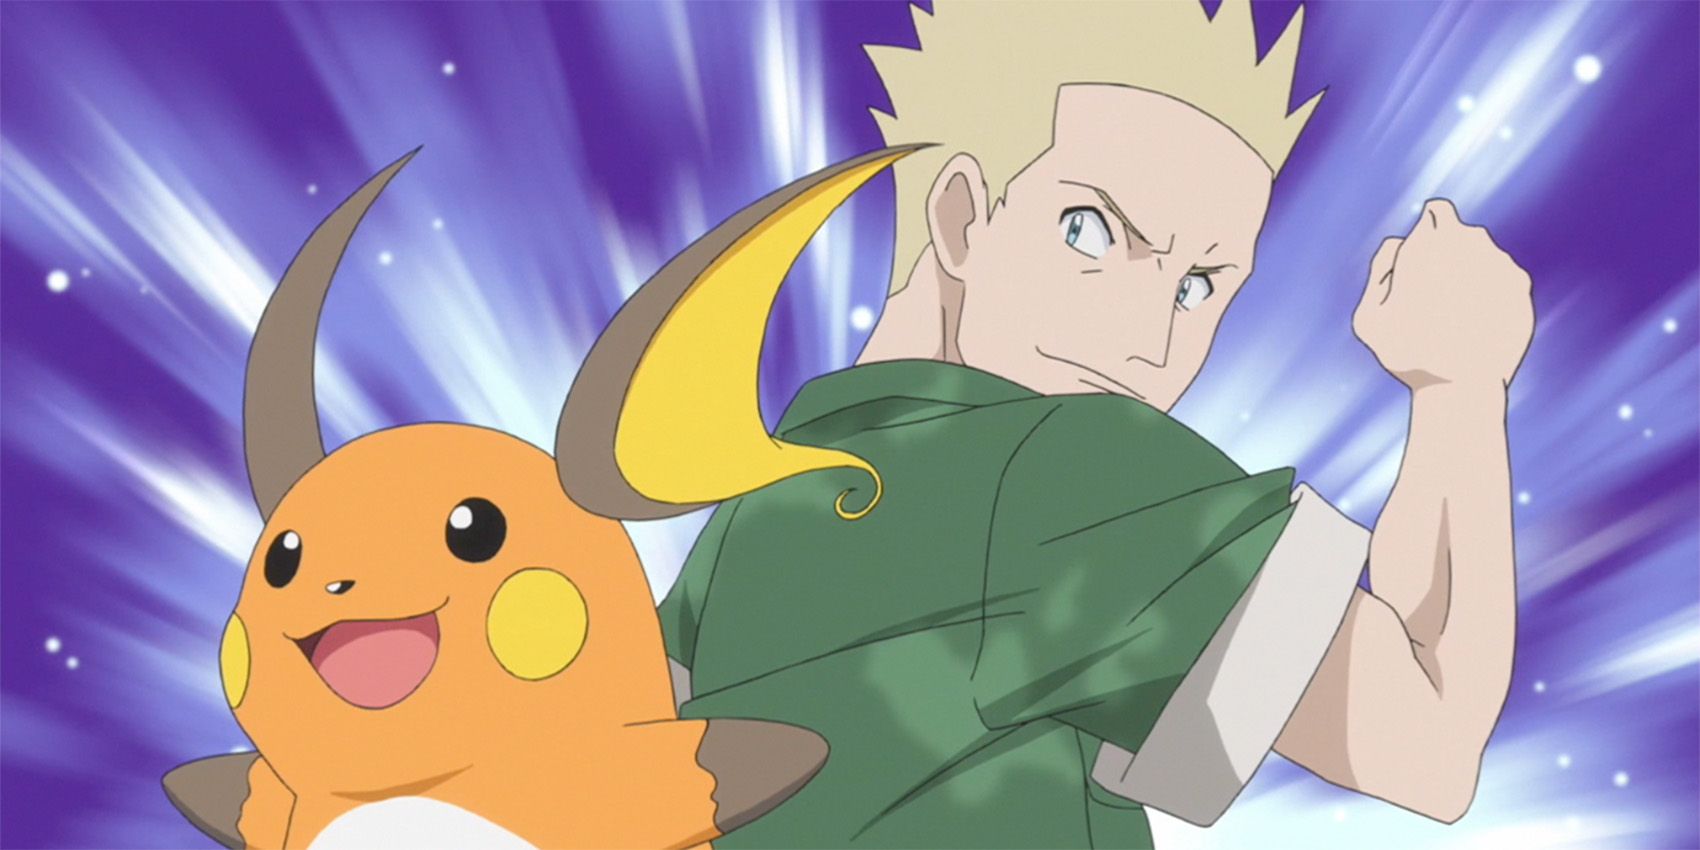 The Pokemon War This BloodSoaked Theory Will Break Your Heart in Half